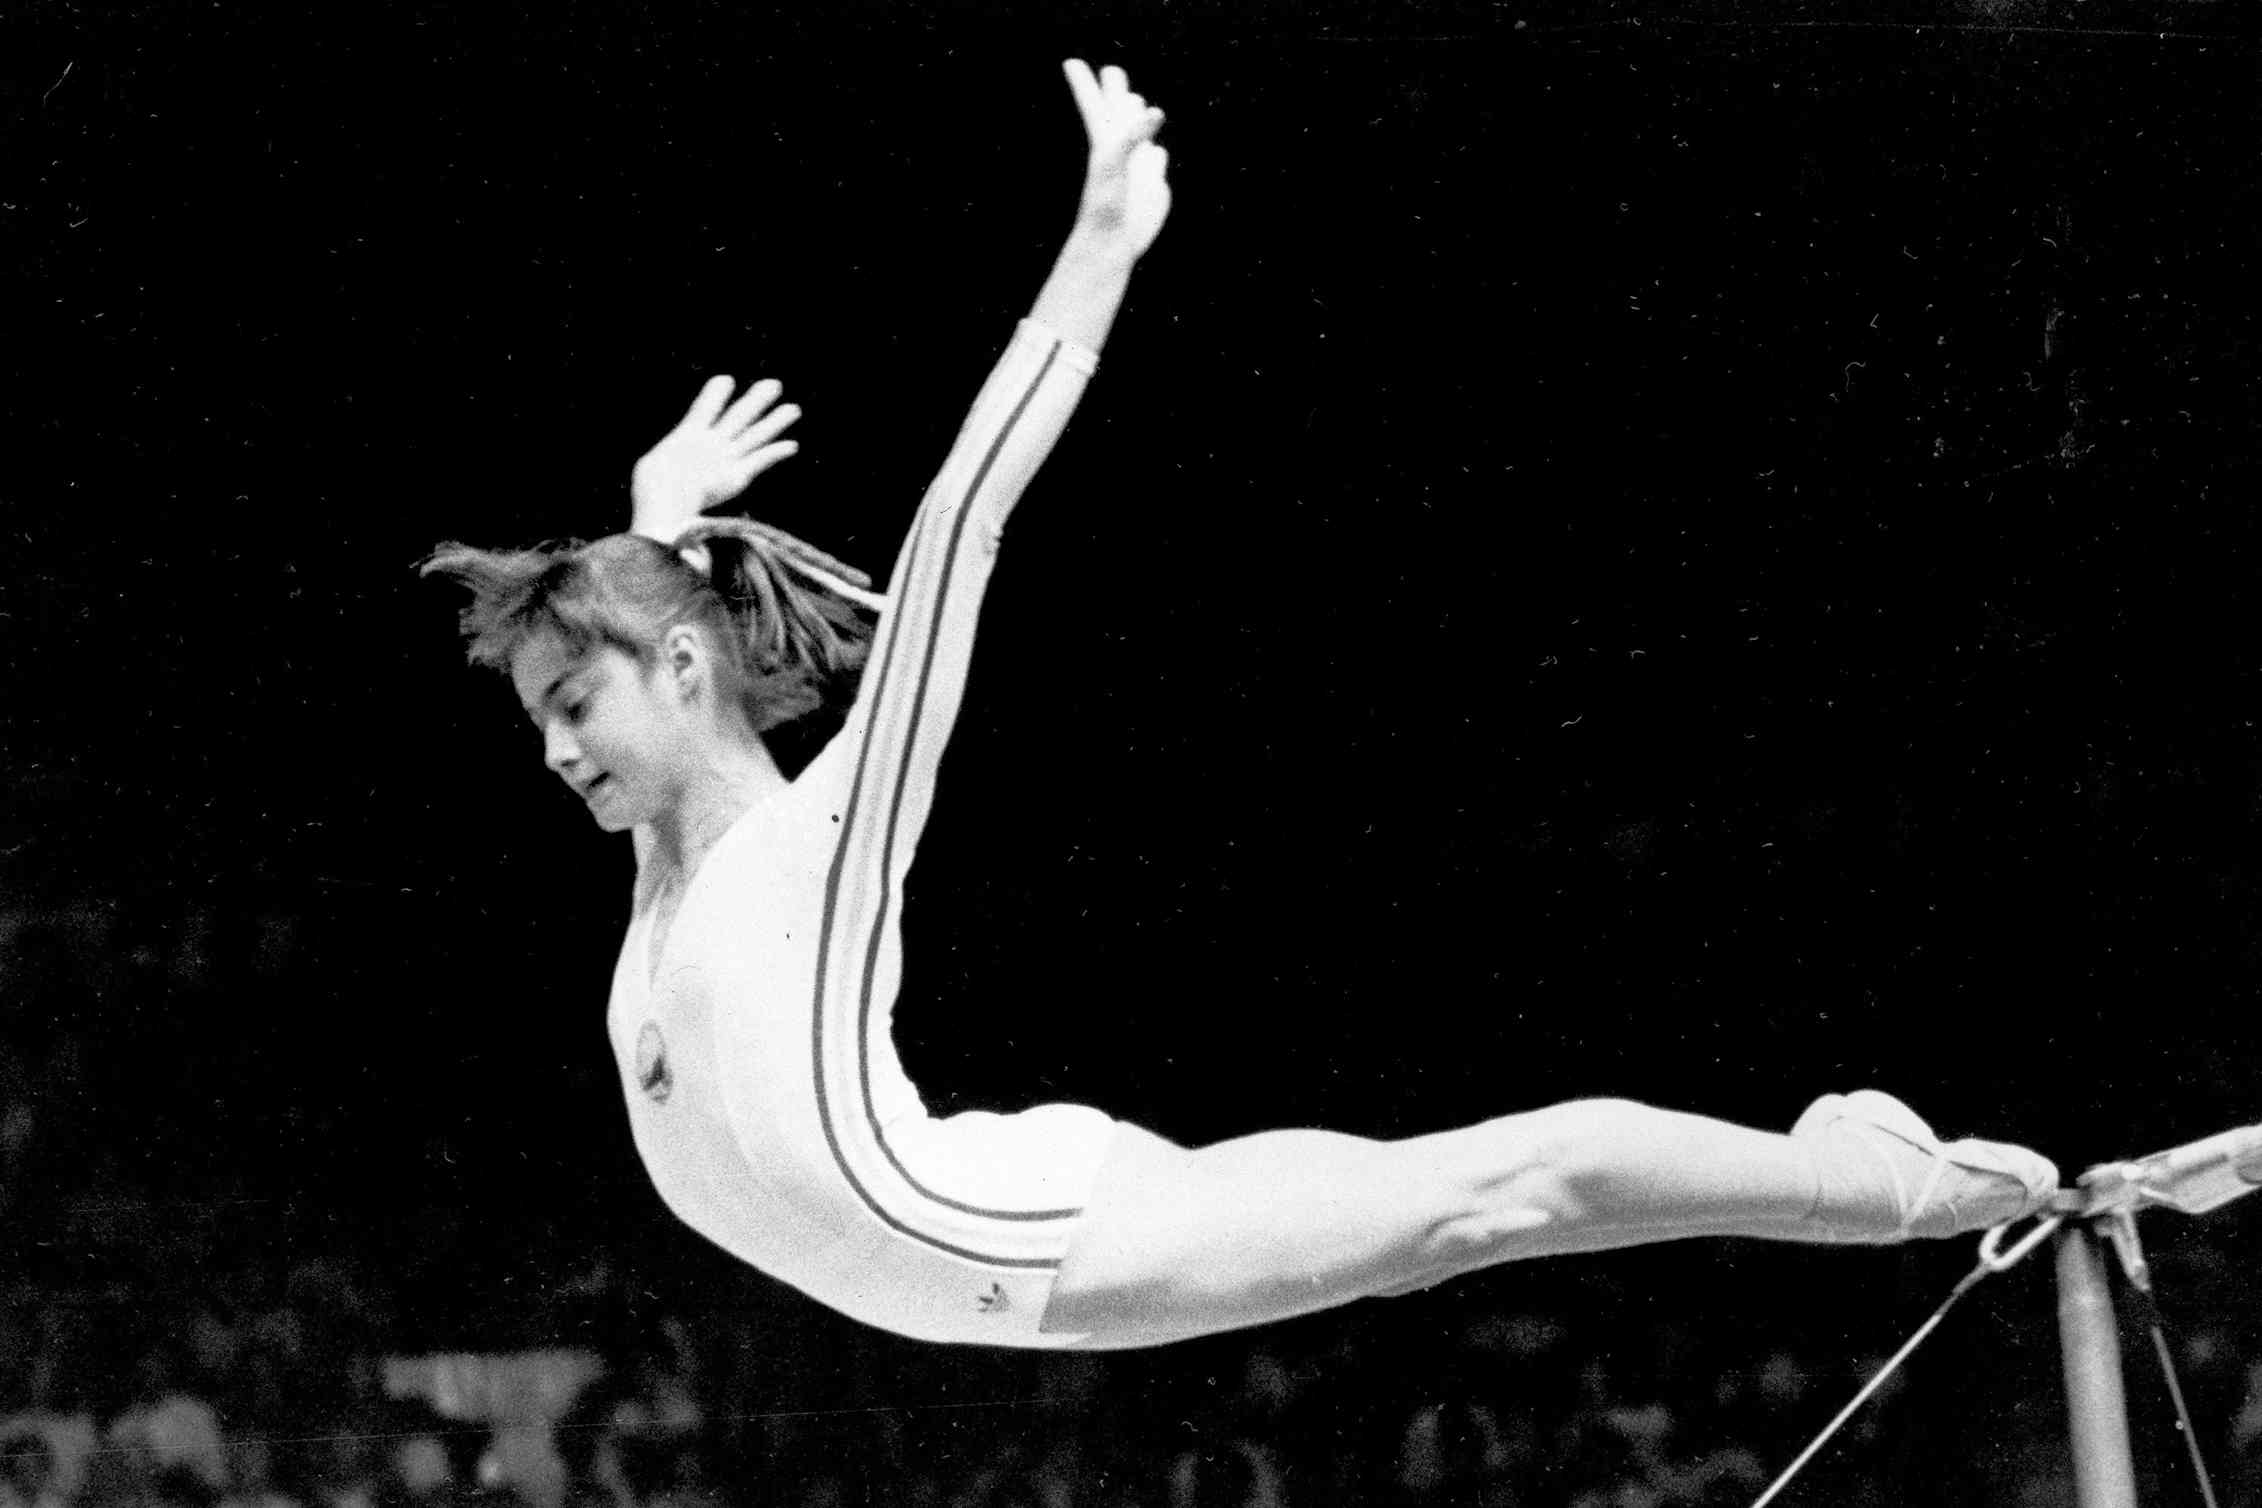 Nadia Comaneci dismounts from the uneven parallel bars to score a perfect